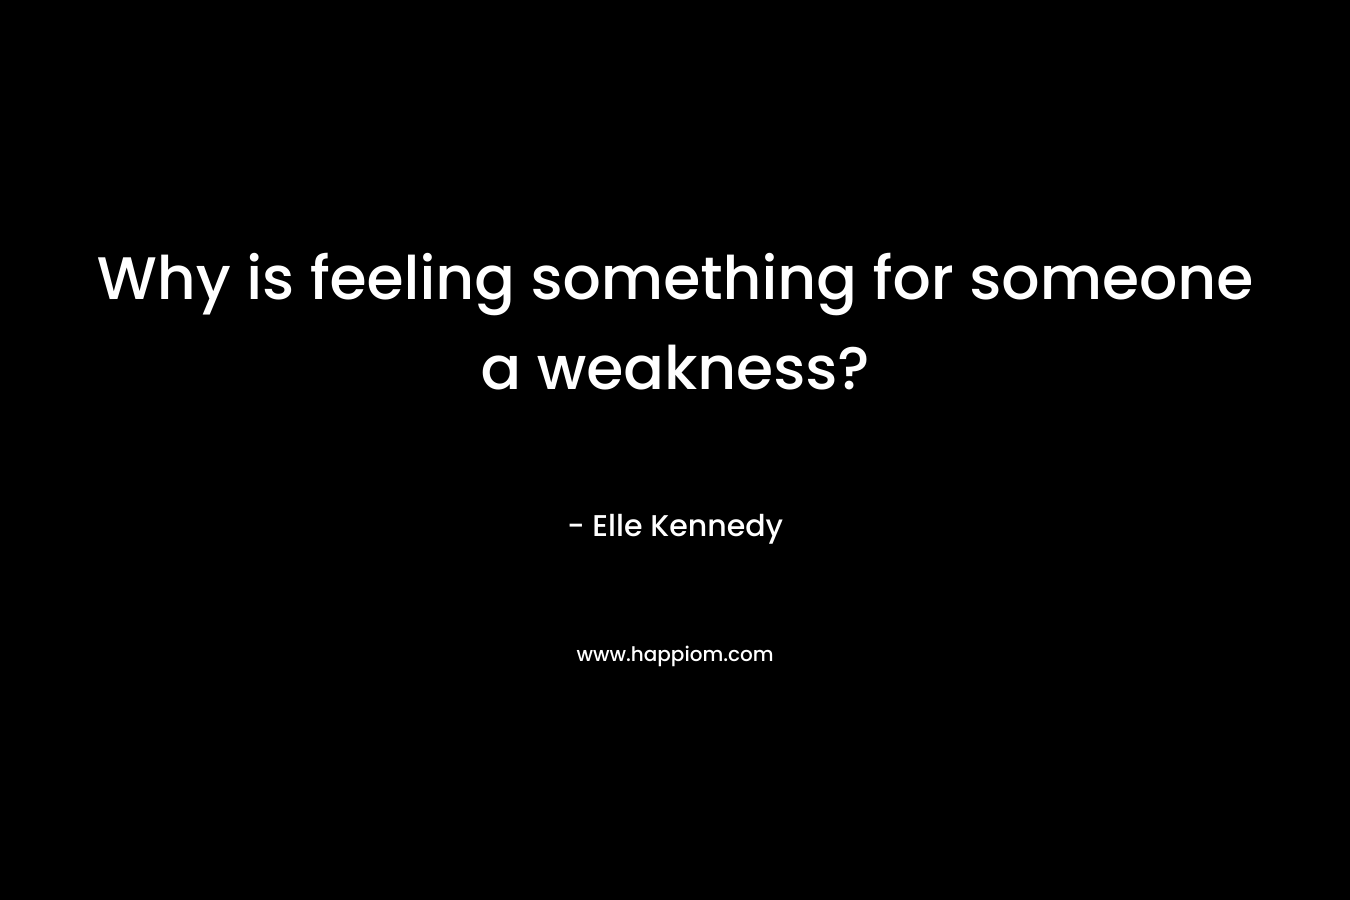 Why is feeling something for someone a weakness?